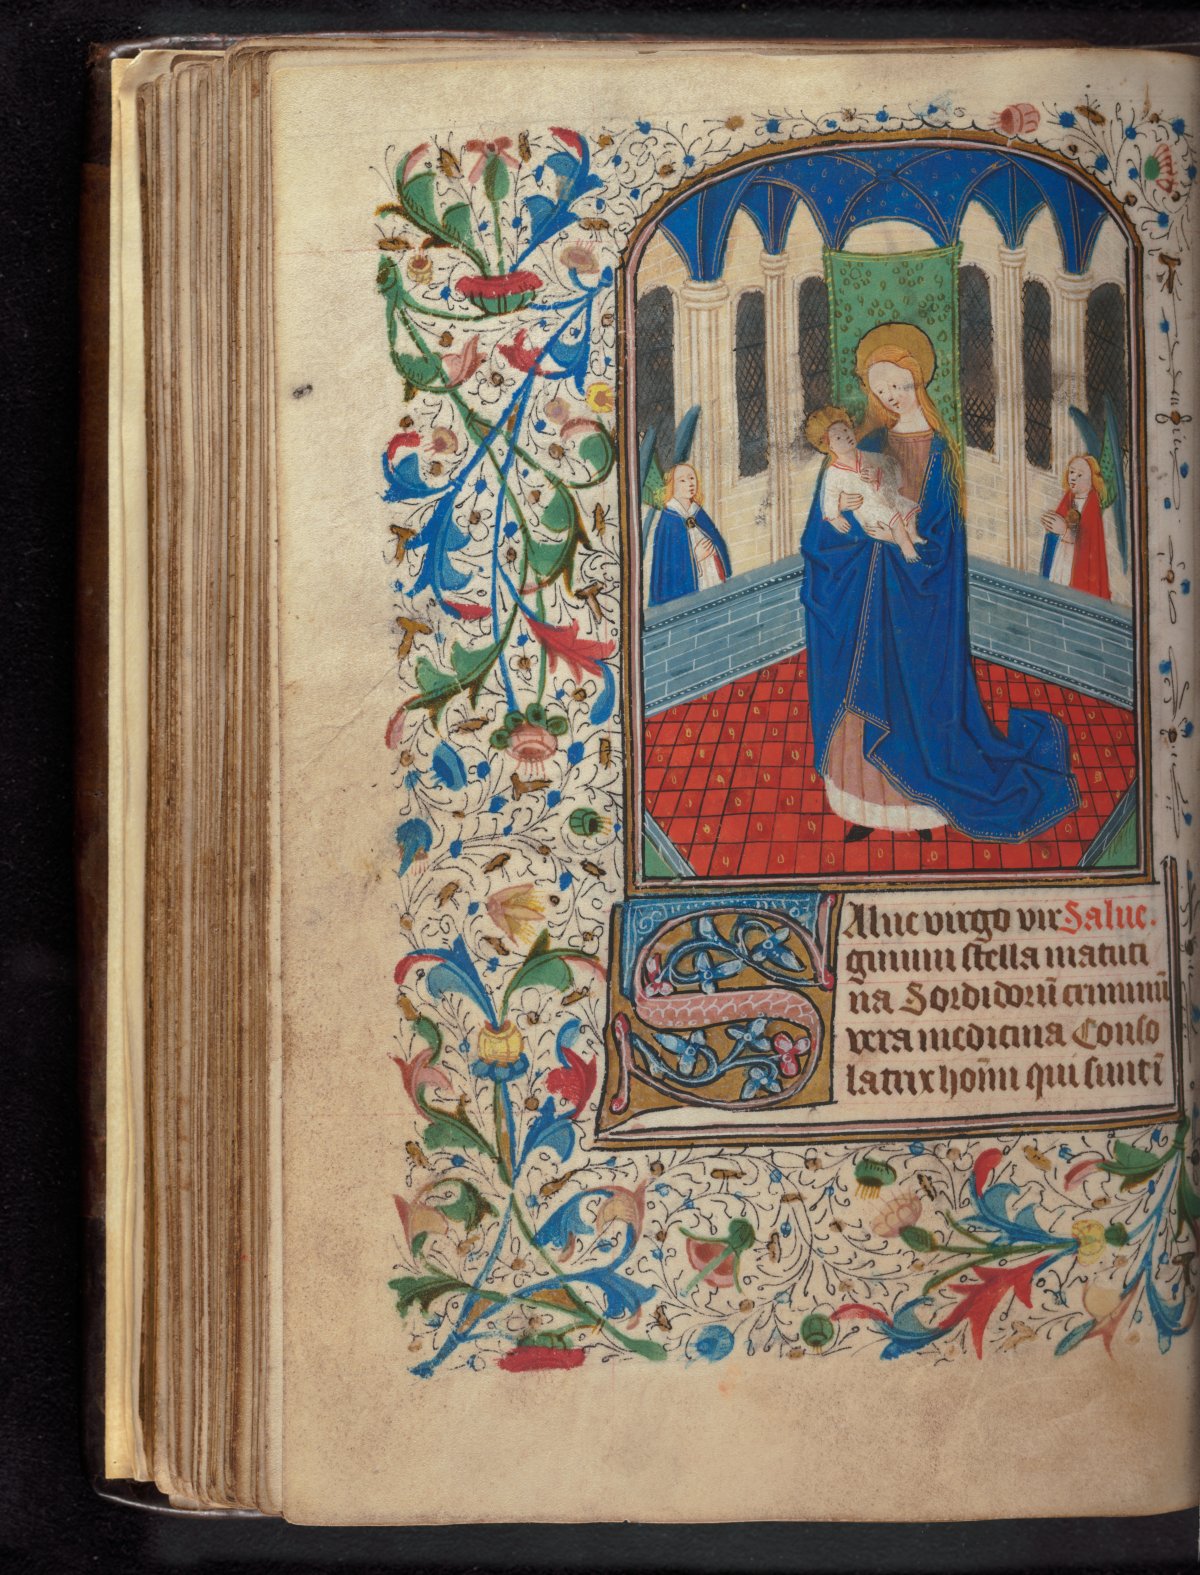 A handwritten page from a book of hours. The page is highly decorated and brightly coloured. An image of a woman holding a baby is framed by leaves and vines.